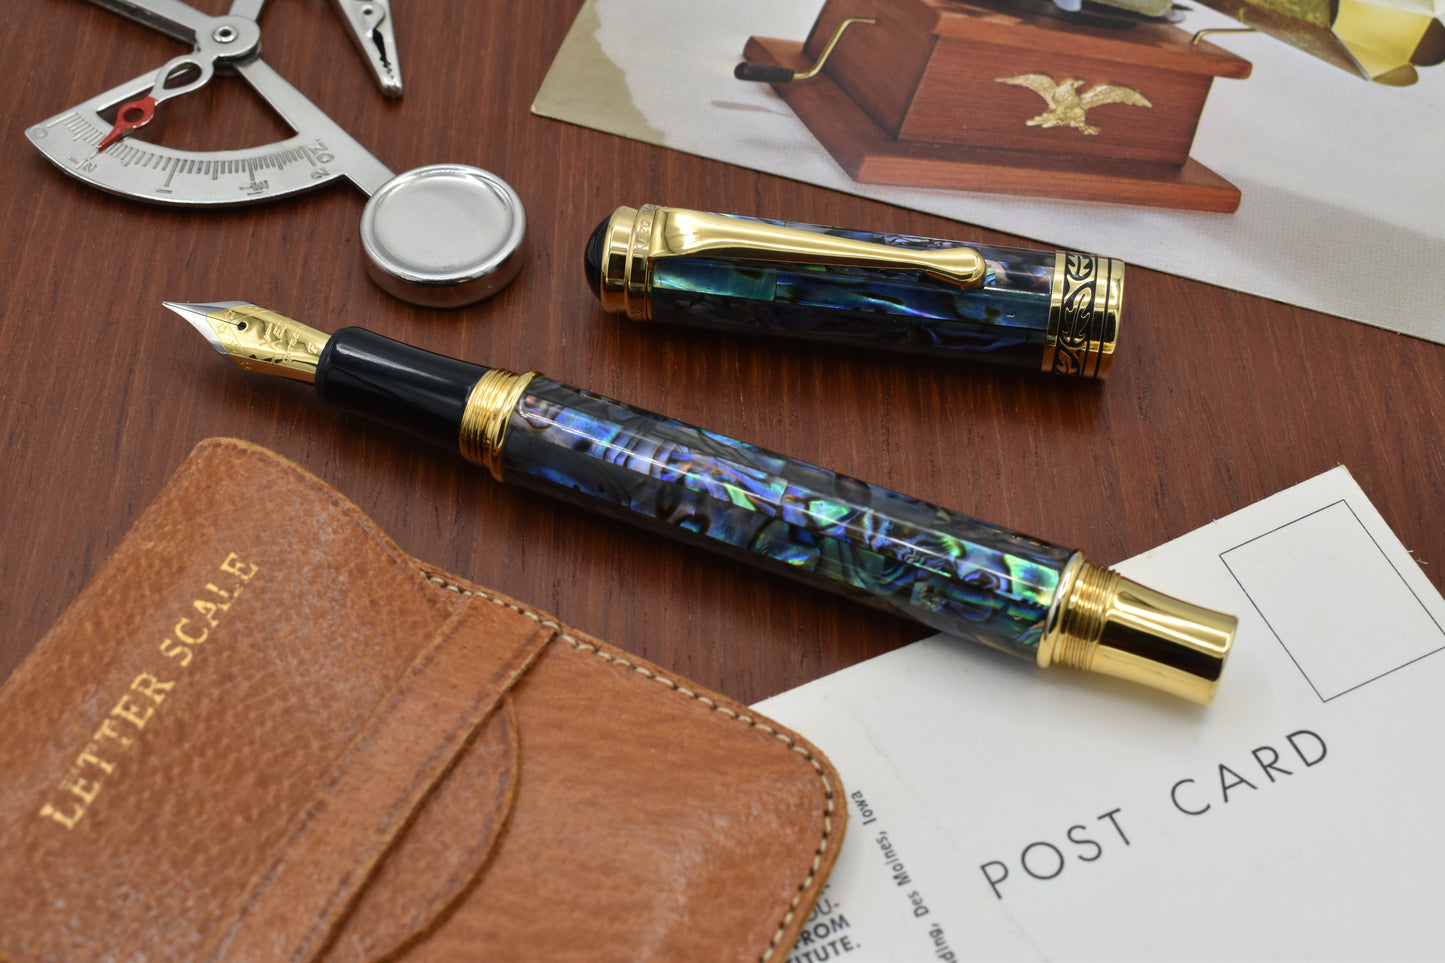 Maestro Sea Shell FPG-1 Fountain pen with vintage letter scale and post cards